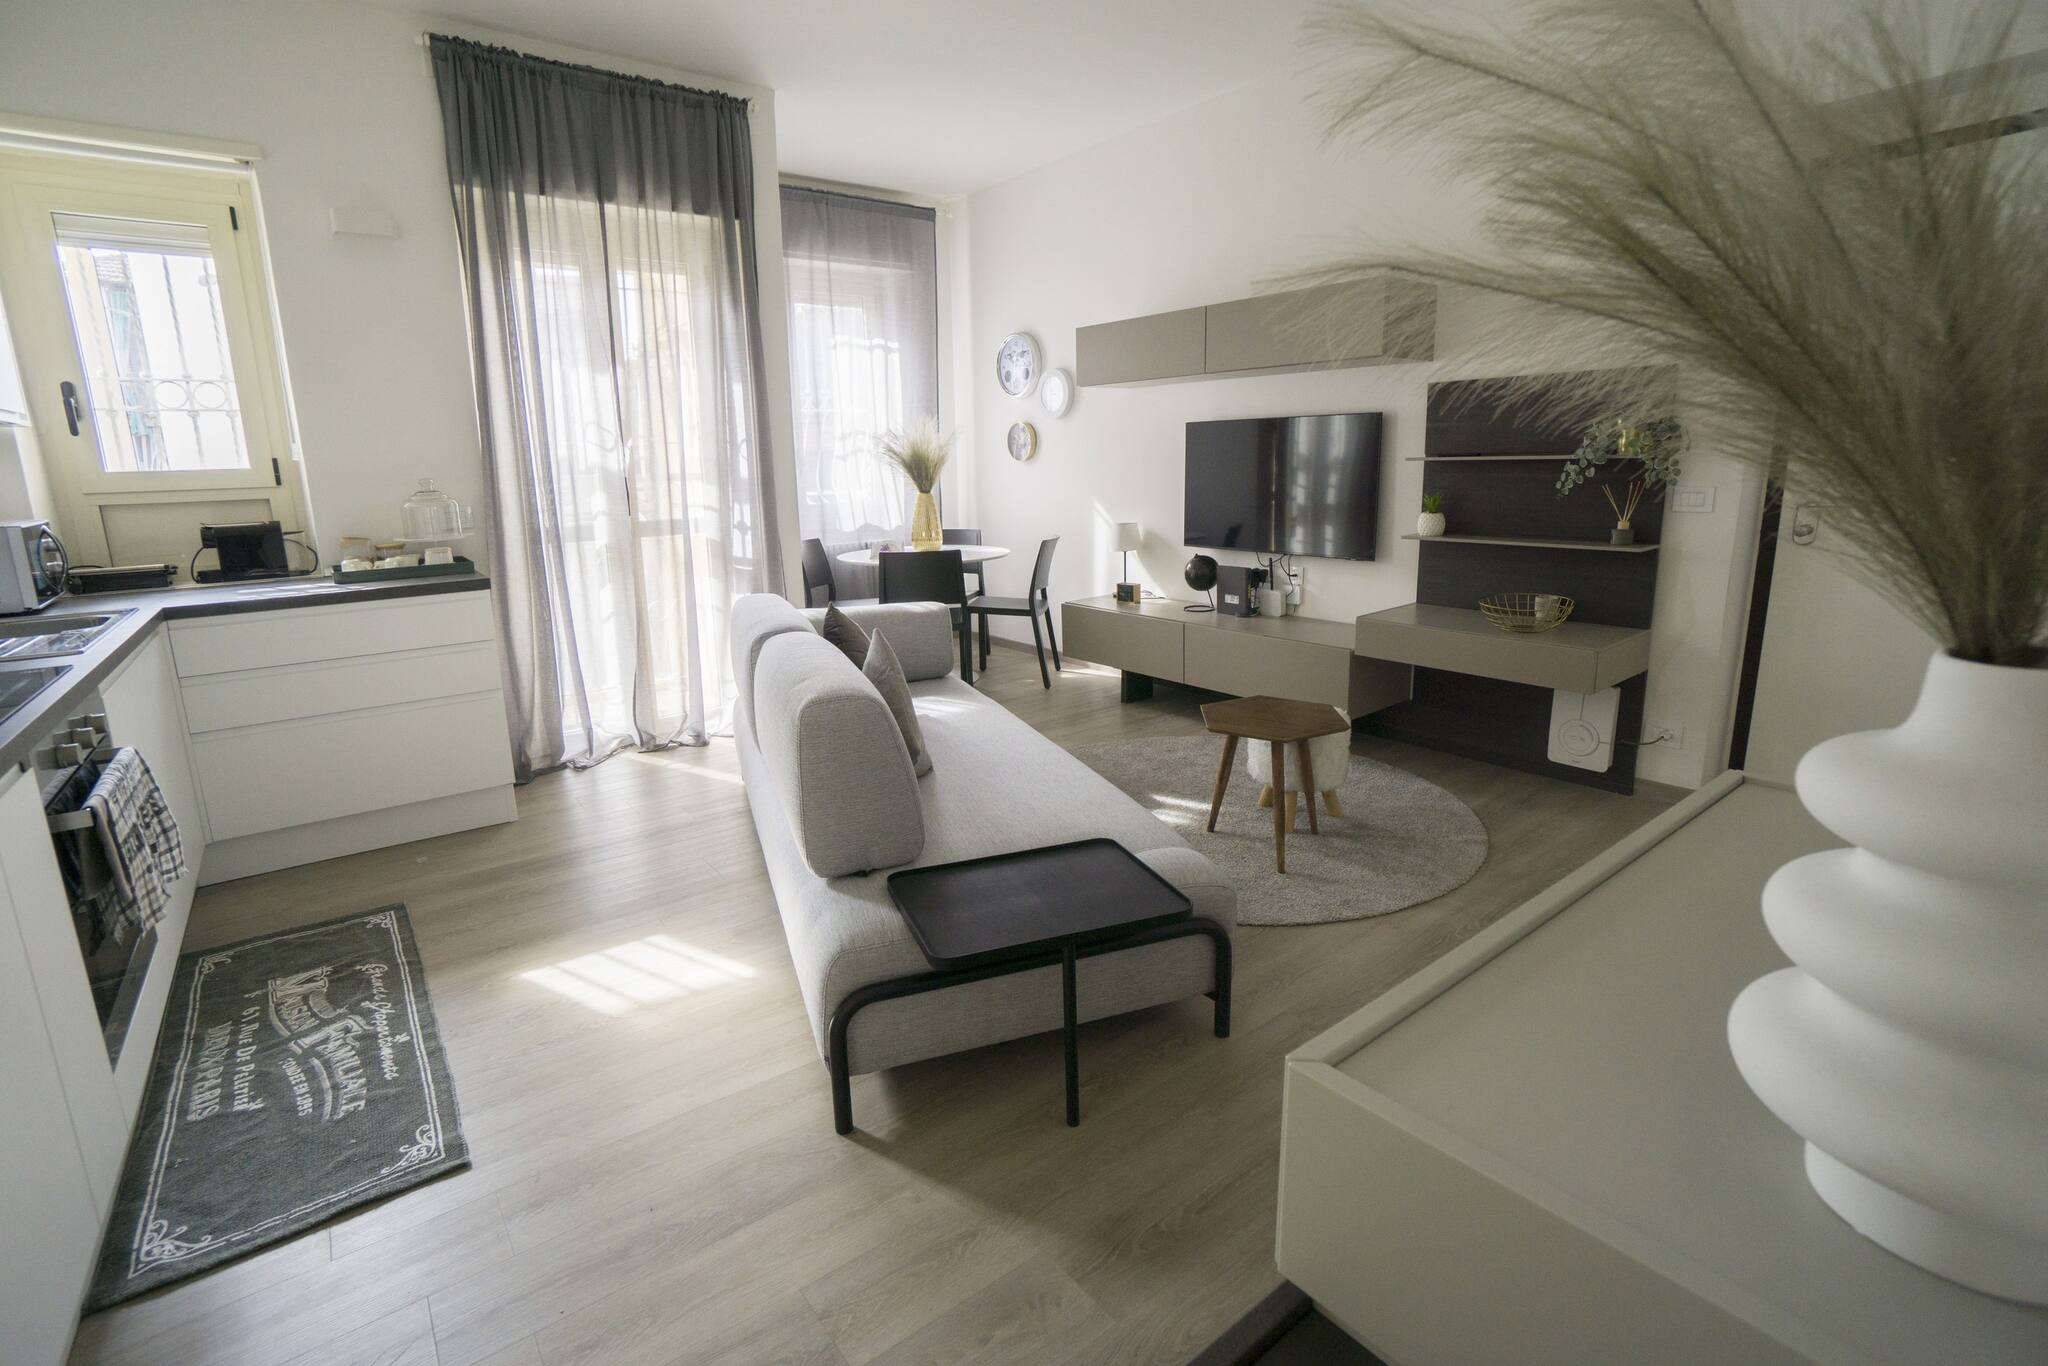 Property Image 2 - Charming and modern three-bedroom apartment in the heart of the city of Asti.